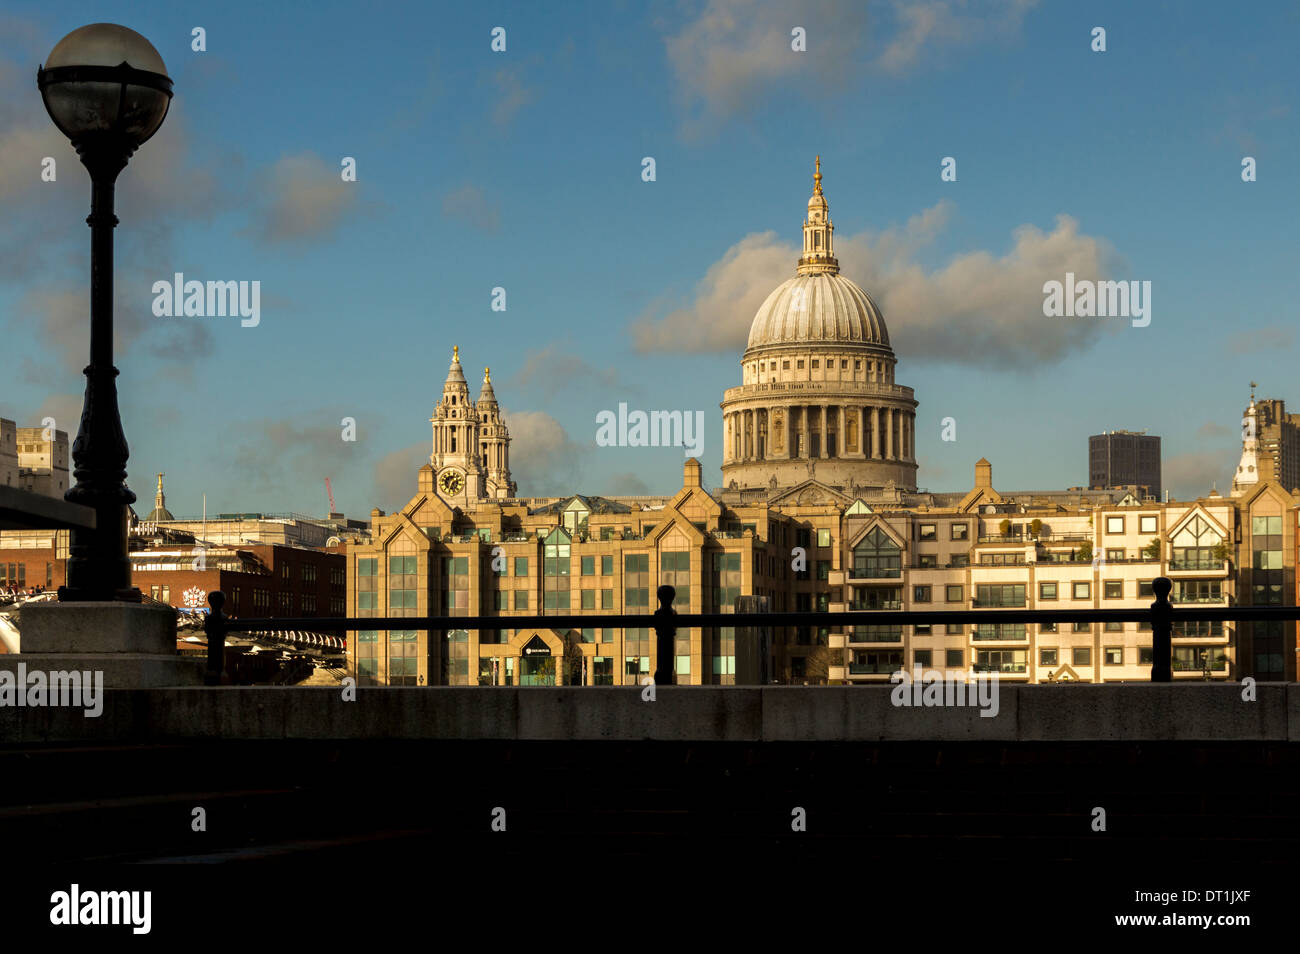 St Paul's Cathedral, situated on the north side of the River Thames, viewed from Bankside, on the south of the river. London. Stock Photo